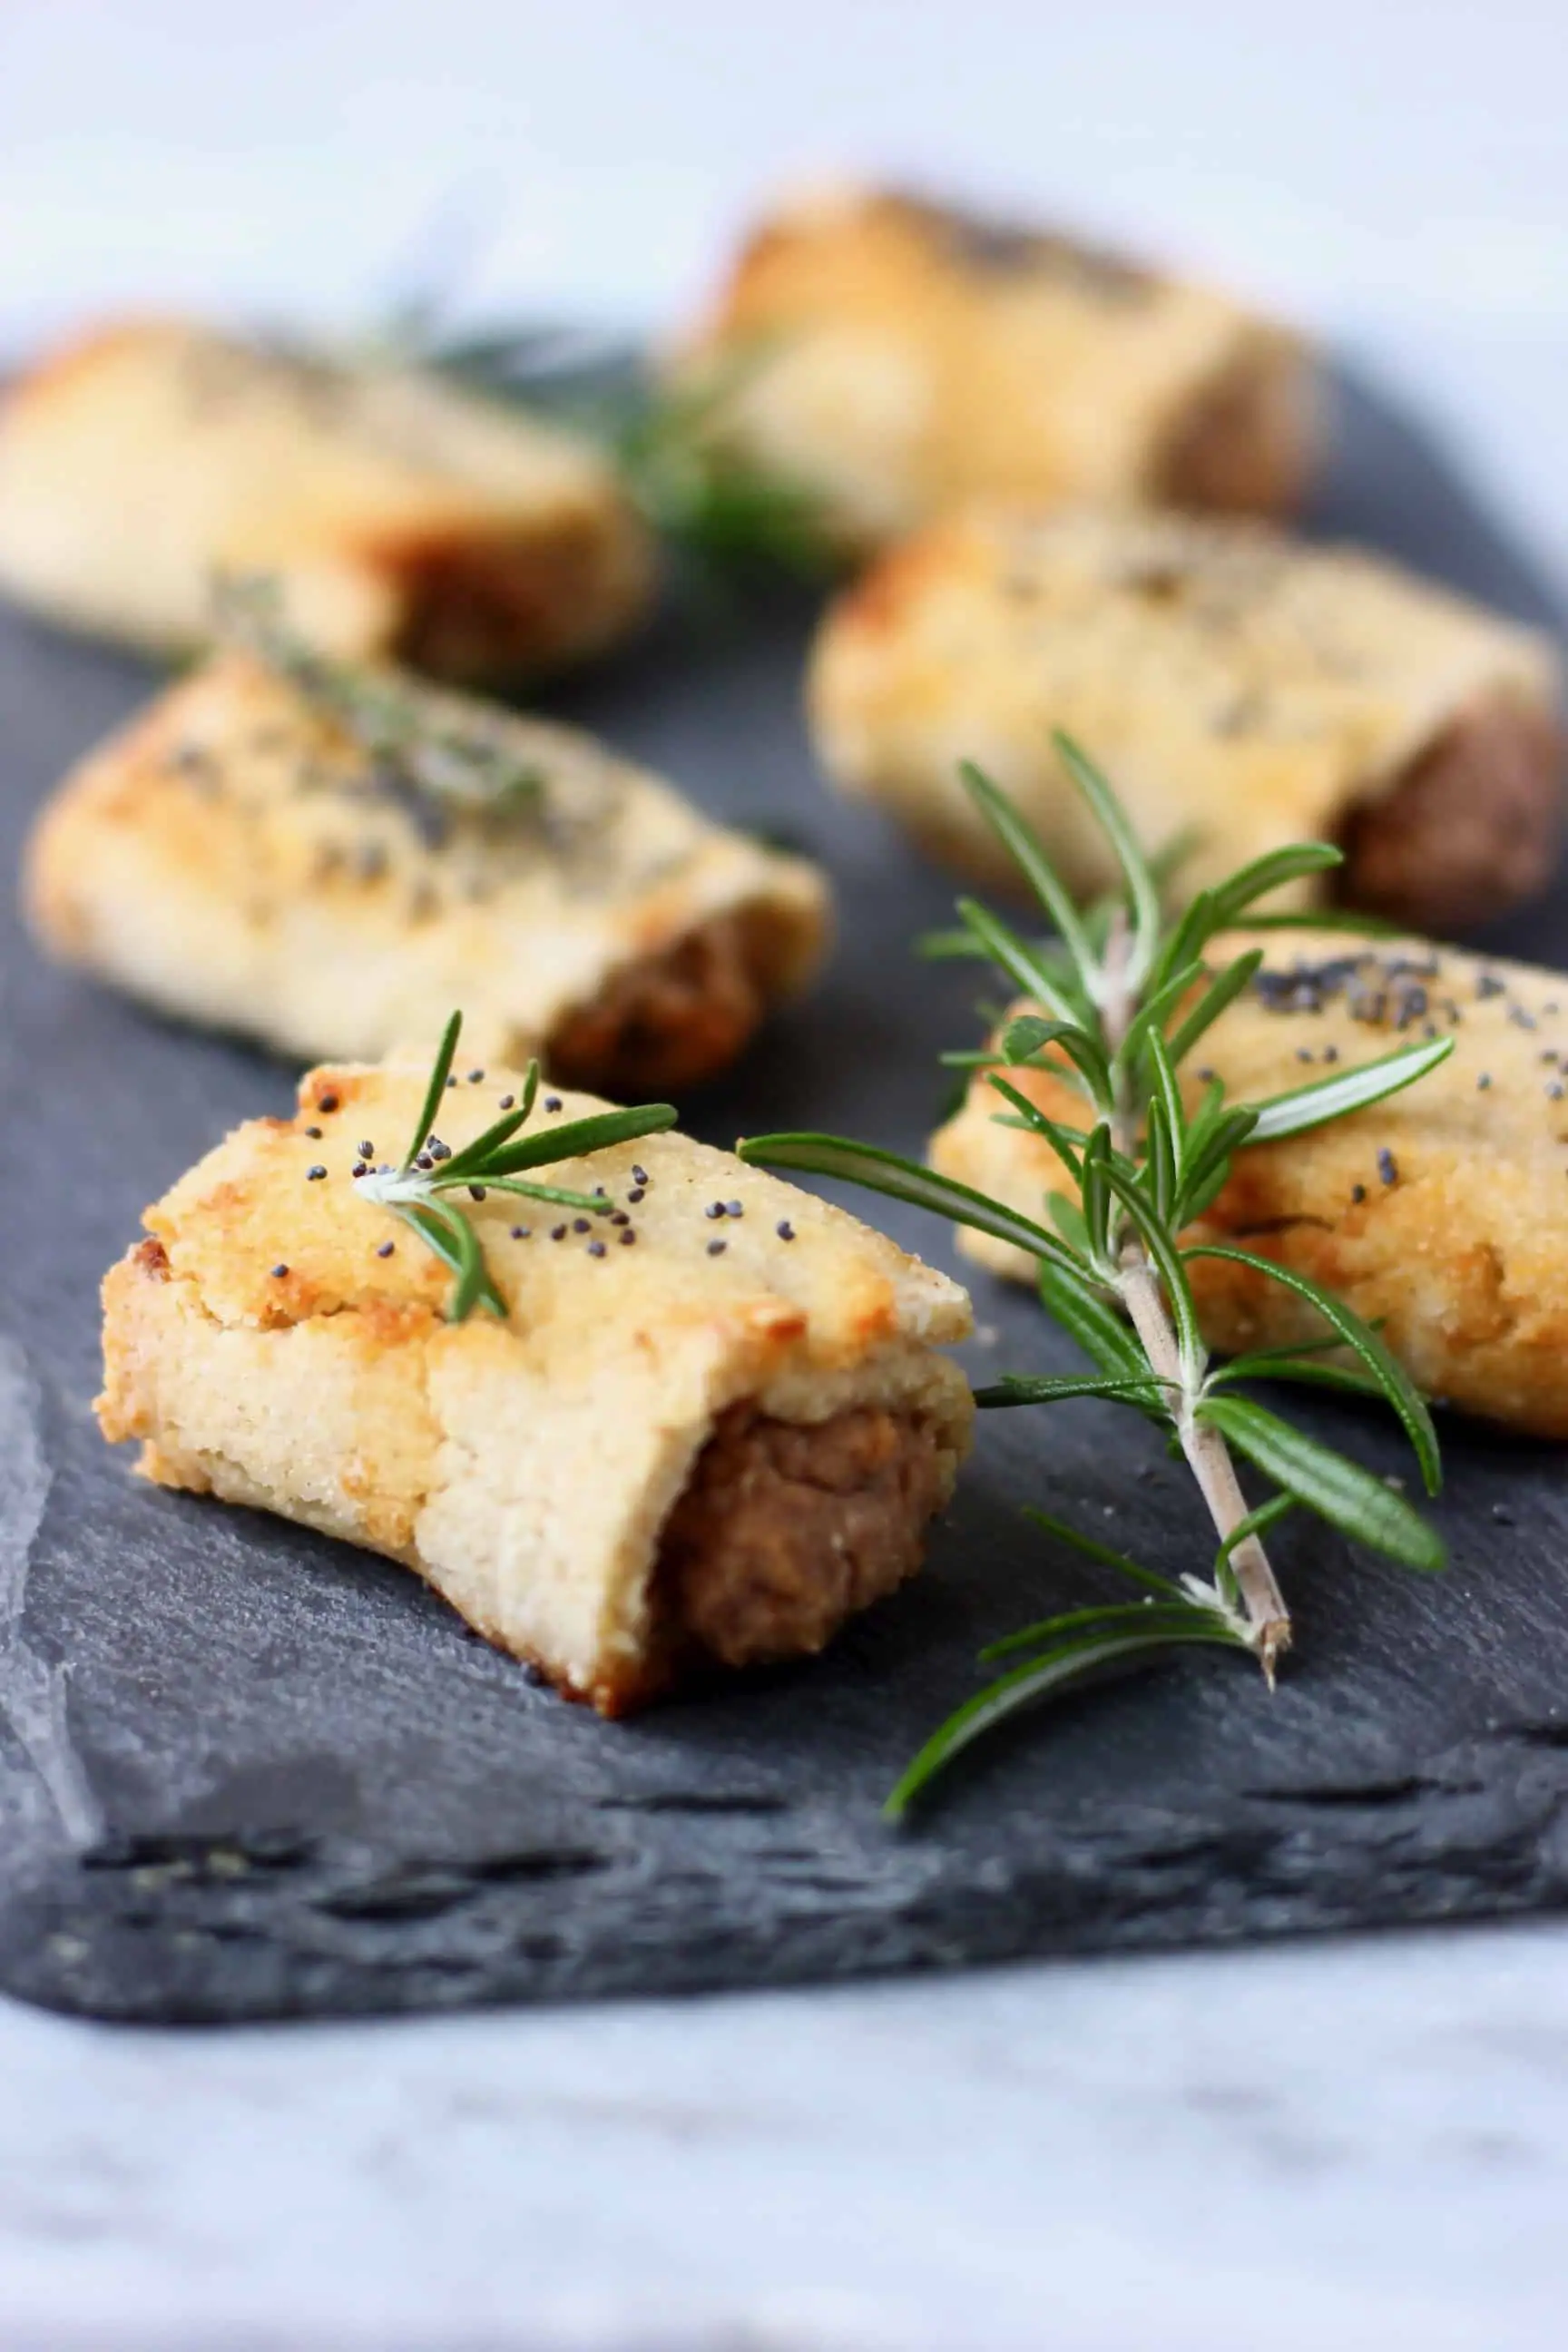 Six vegan sausage rolls sprinkled with poppy seeds on a black slab decorated with sprigs of rosemary